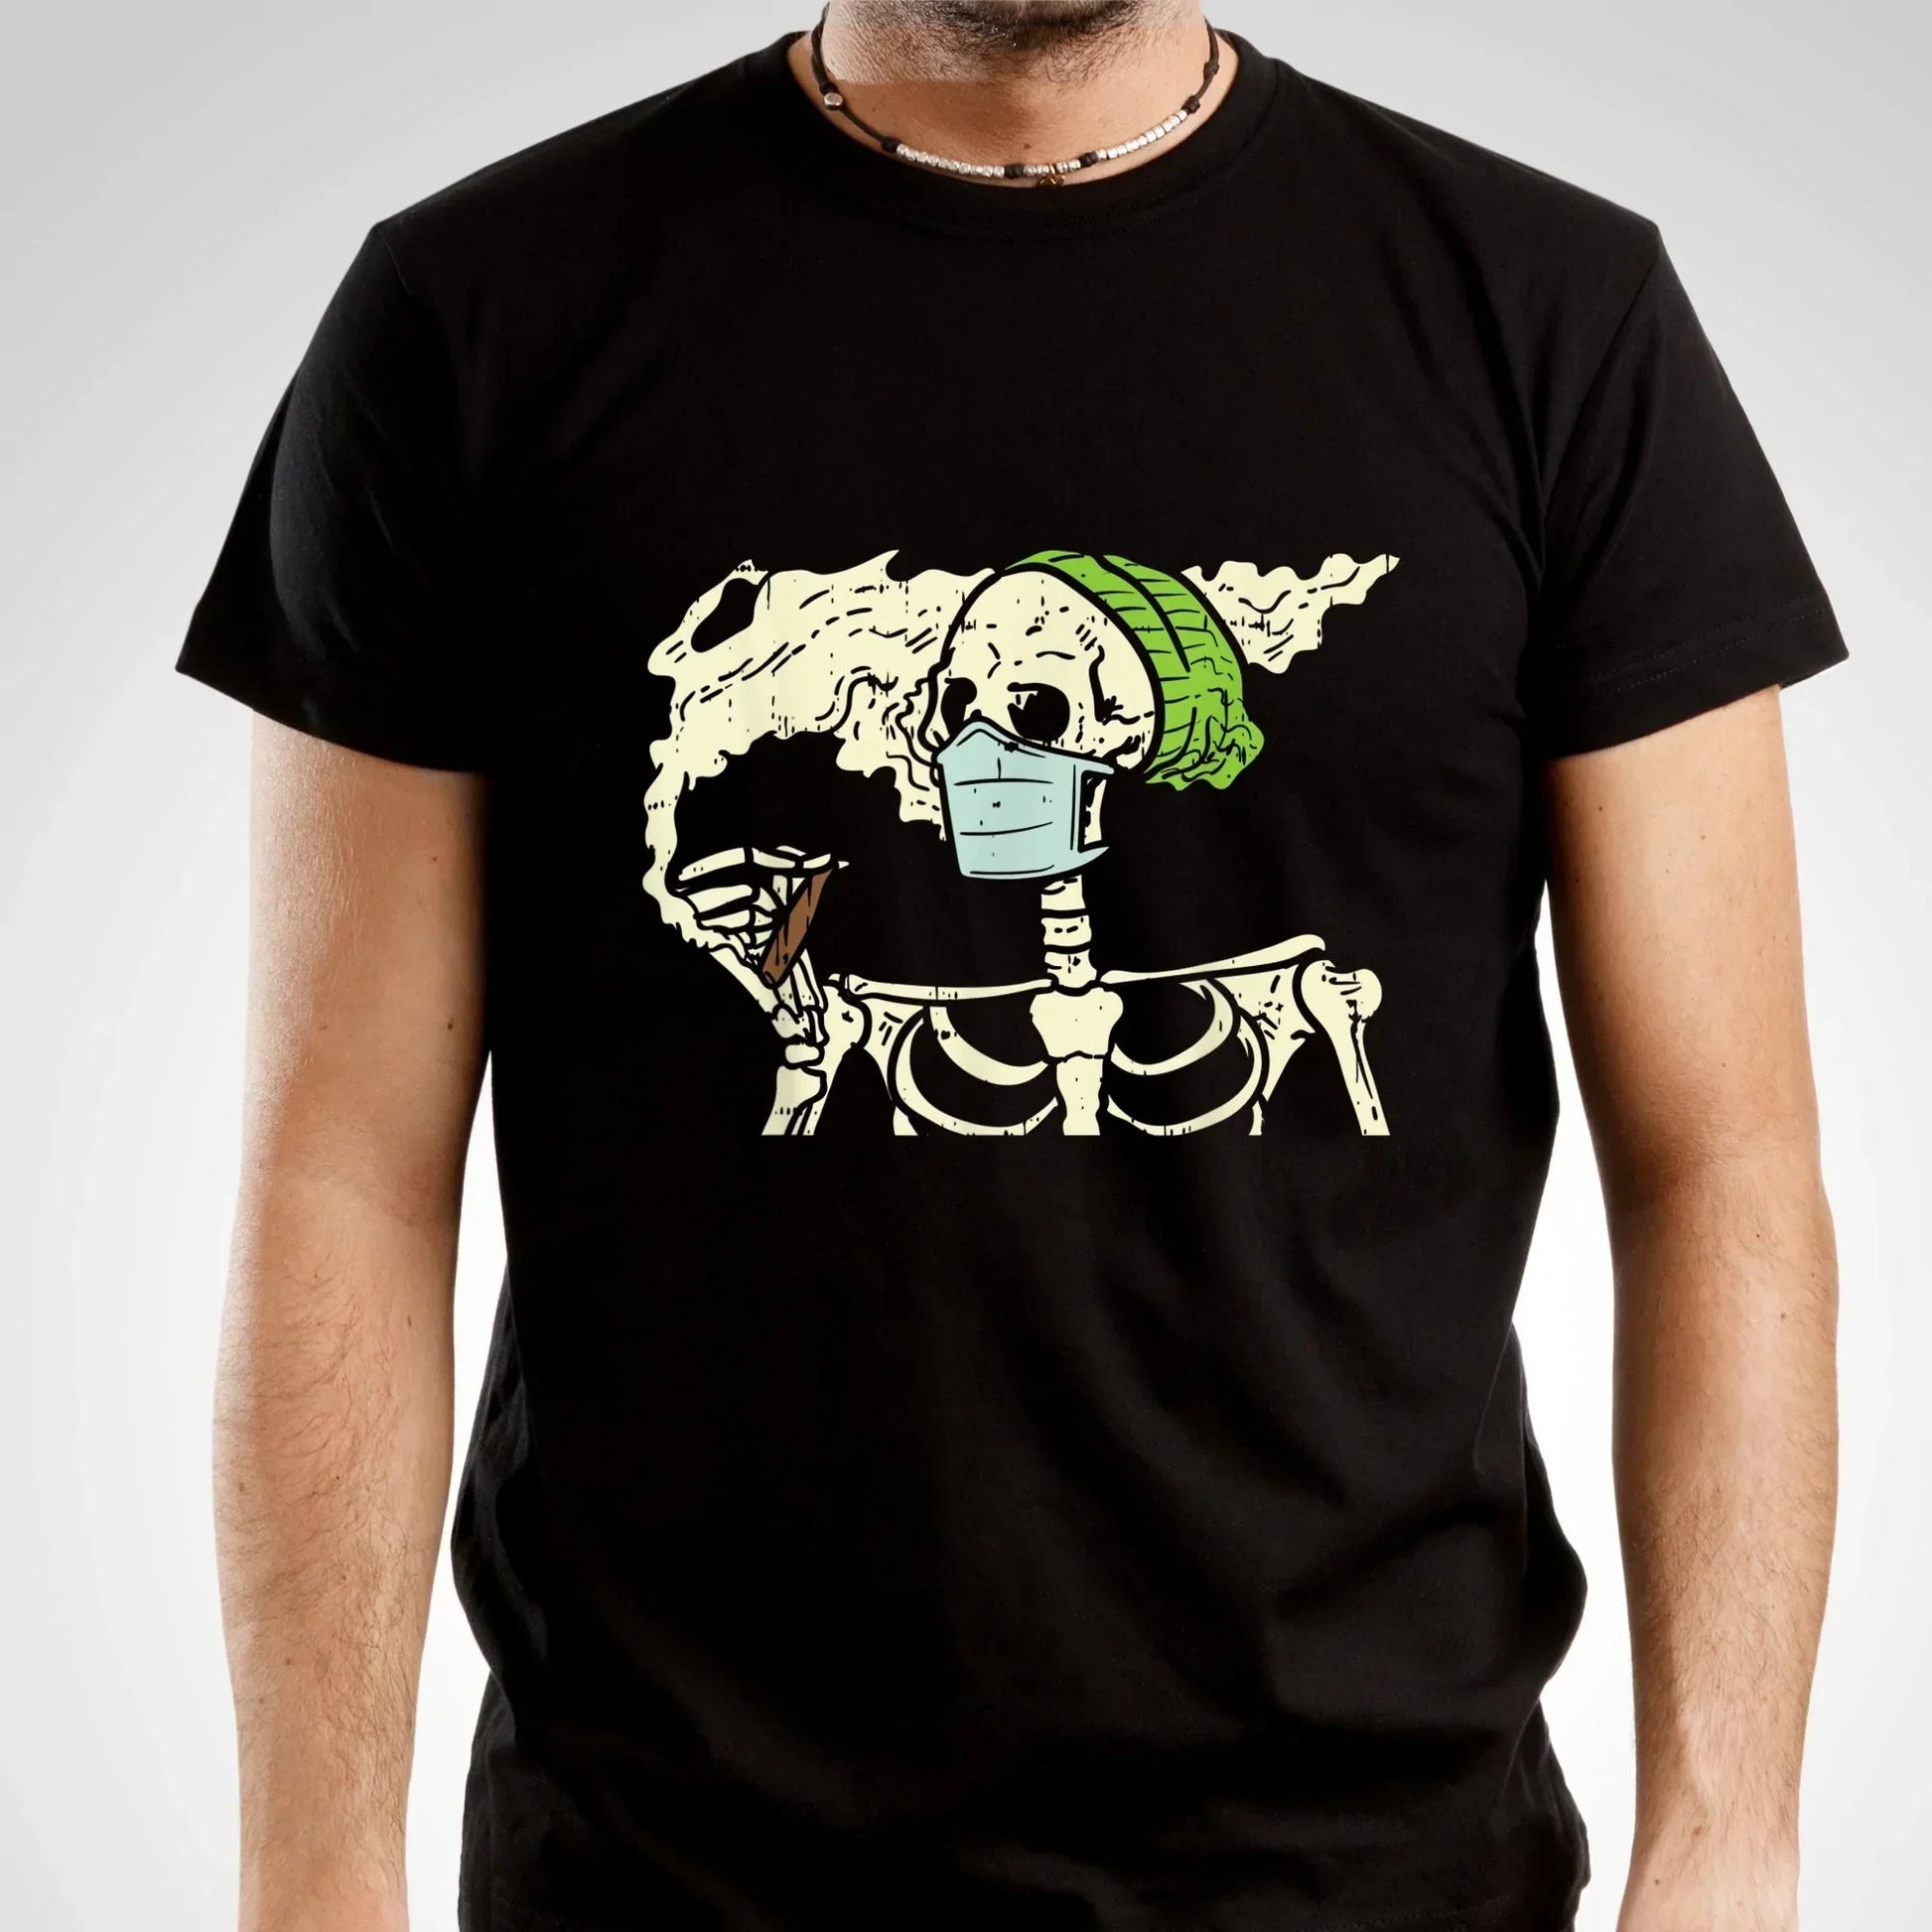 Stoner Gifts, Skeleton Shirt, Weed Gifts, Weed Shirt, Stoner Gift, Stoner Girl, Stoner Gift for Him, Stoner Gift for Her, Marijuana T shirts